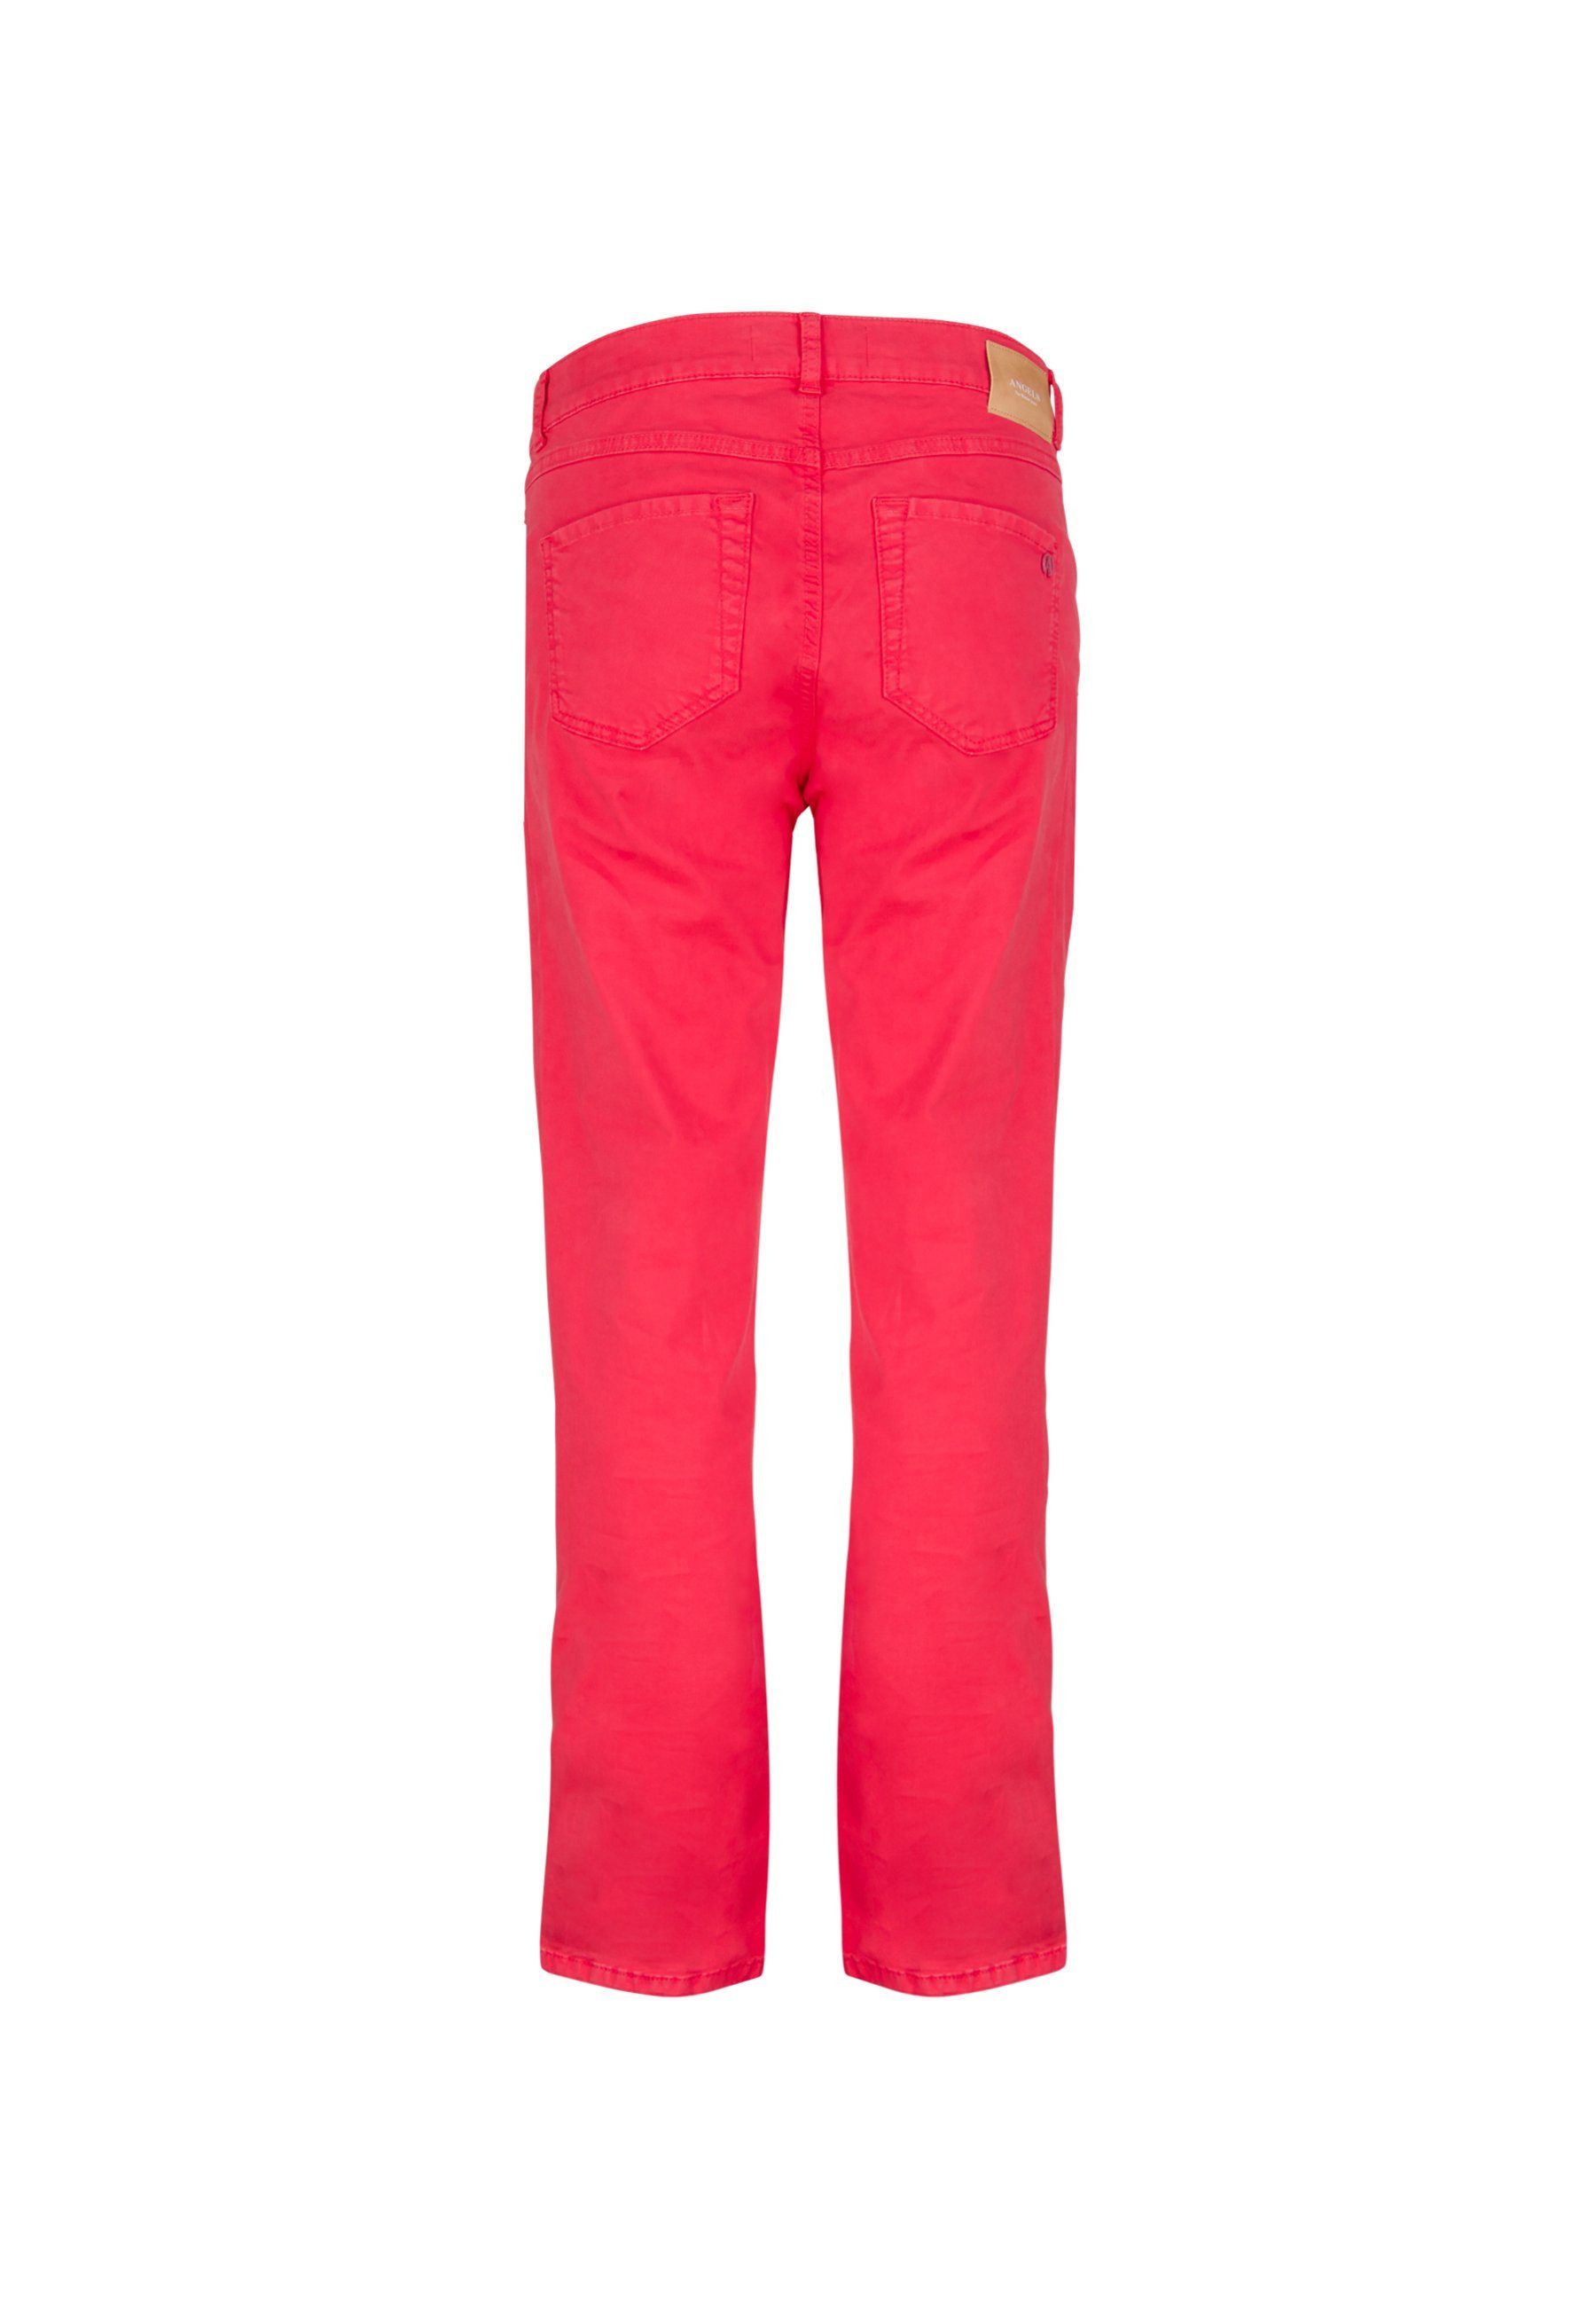 Denim mit ANGELS Jeans Ton-in-Ton-Nähte Cici Straight-Jeans pink Coloured